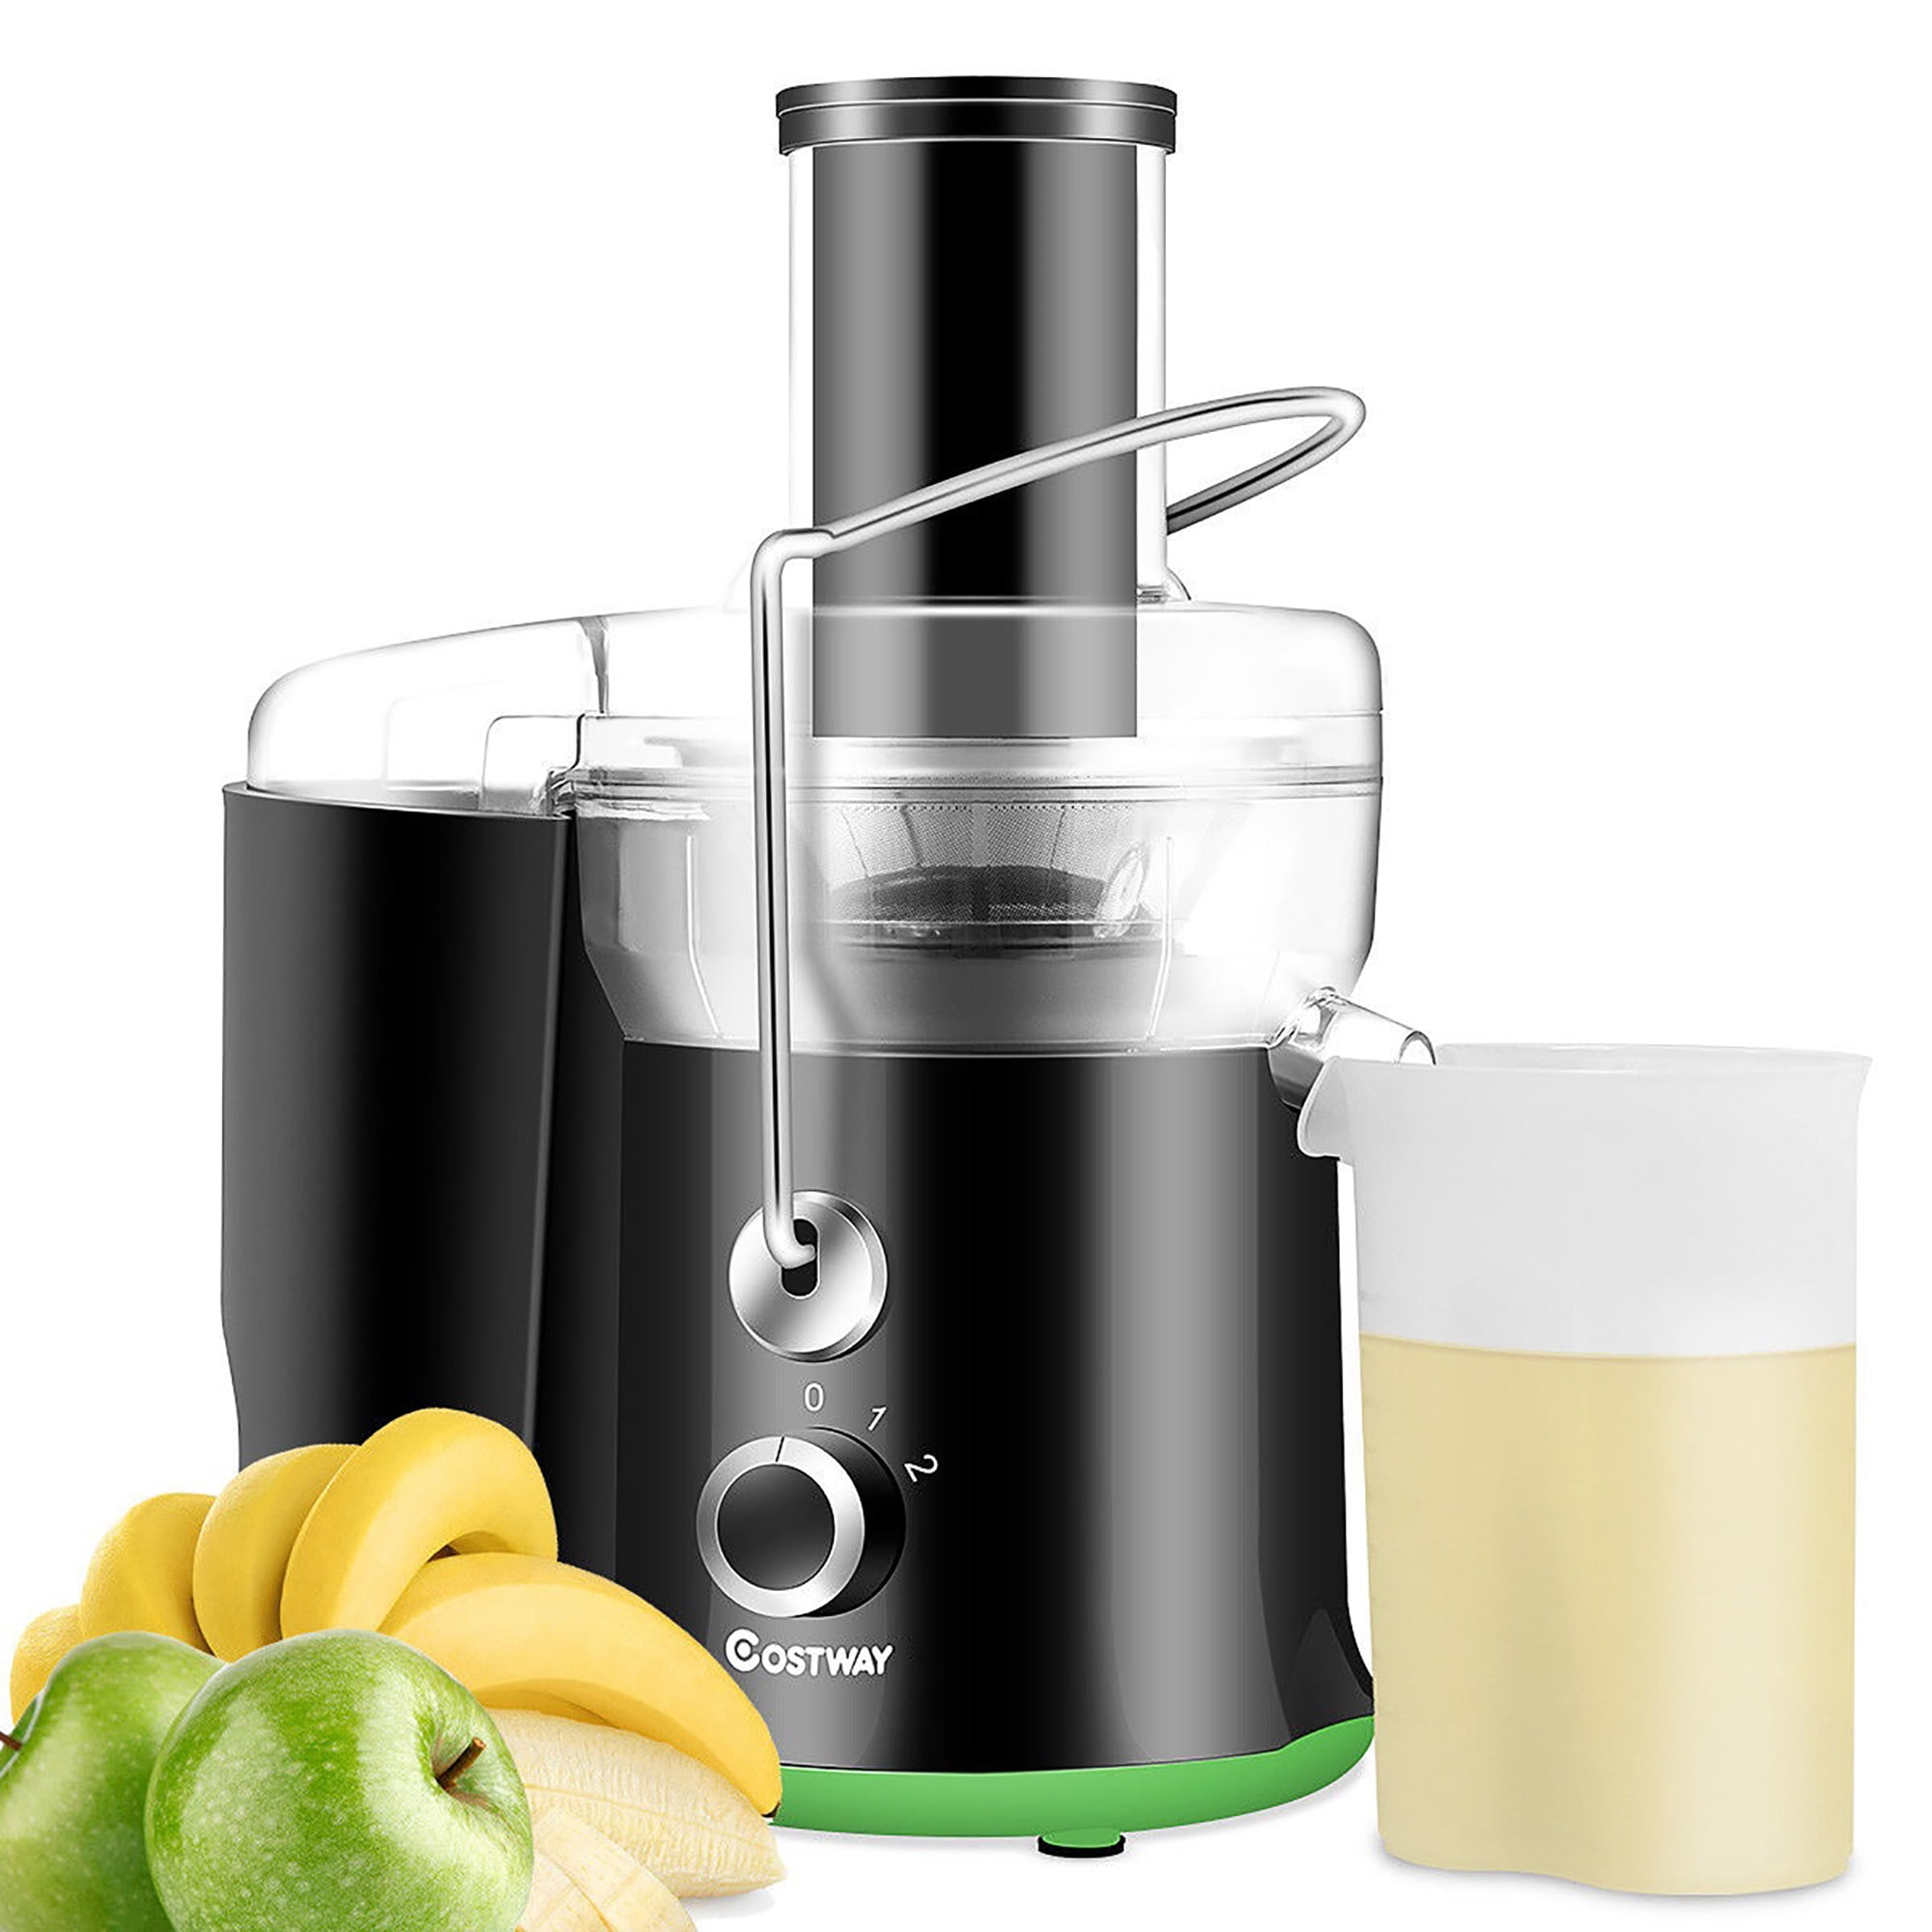 Easy to Use and Clean & BPA-Free FOCHEA Wide Mouth 3” Centrifugal Juicer Machine for Fruit and Vegetable Juicer Anti-drip with Pulse Function and Multi Speed Control Juice Extractor and Vegetables